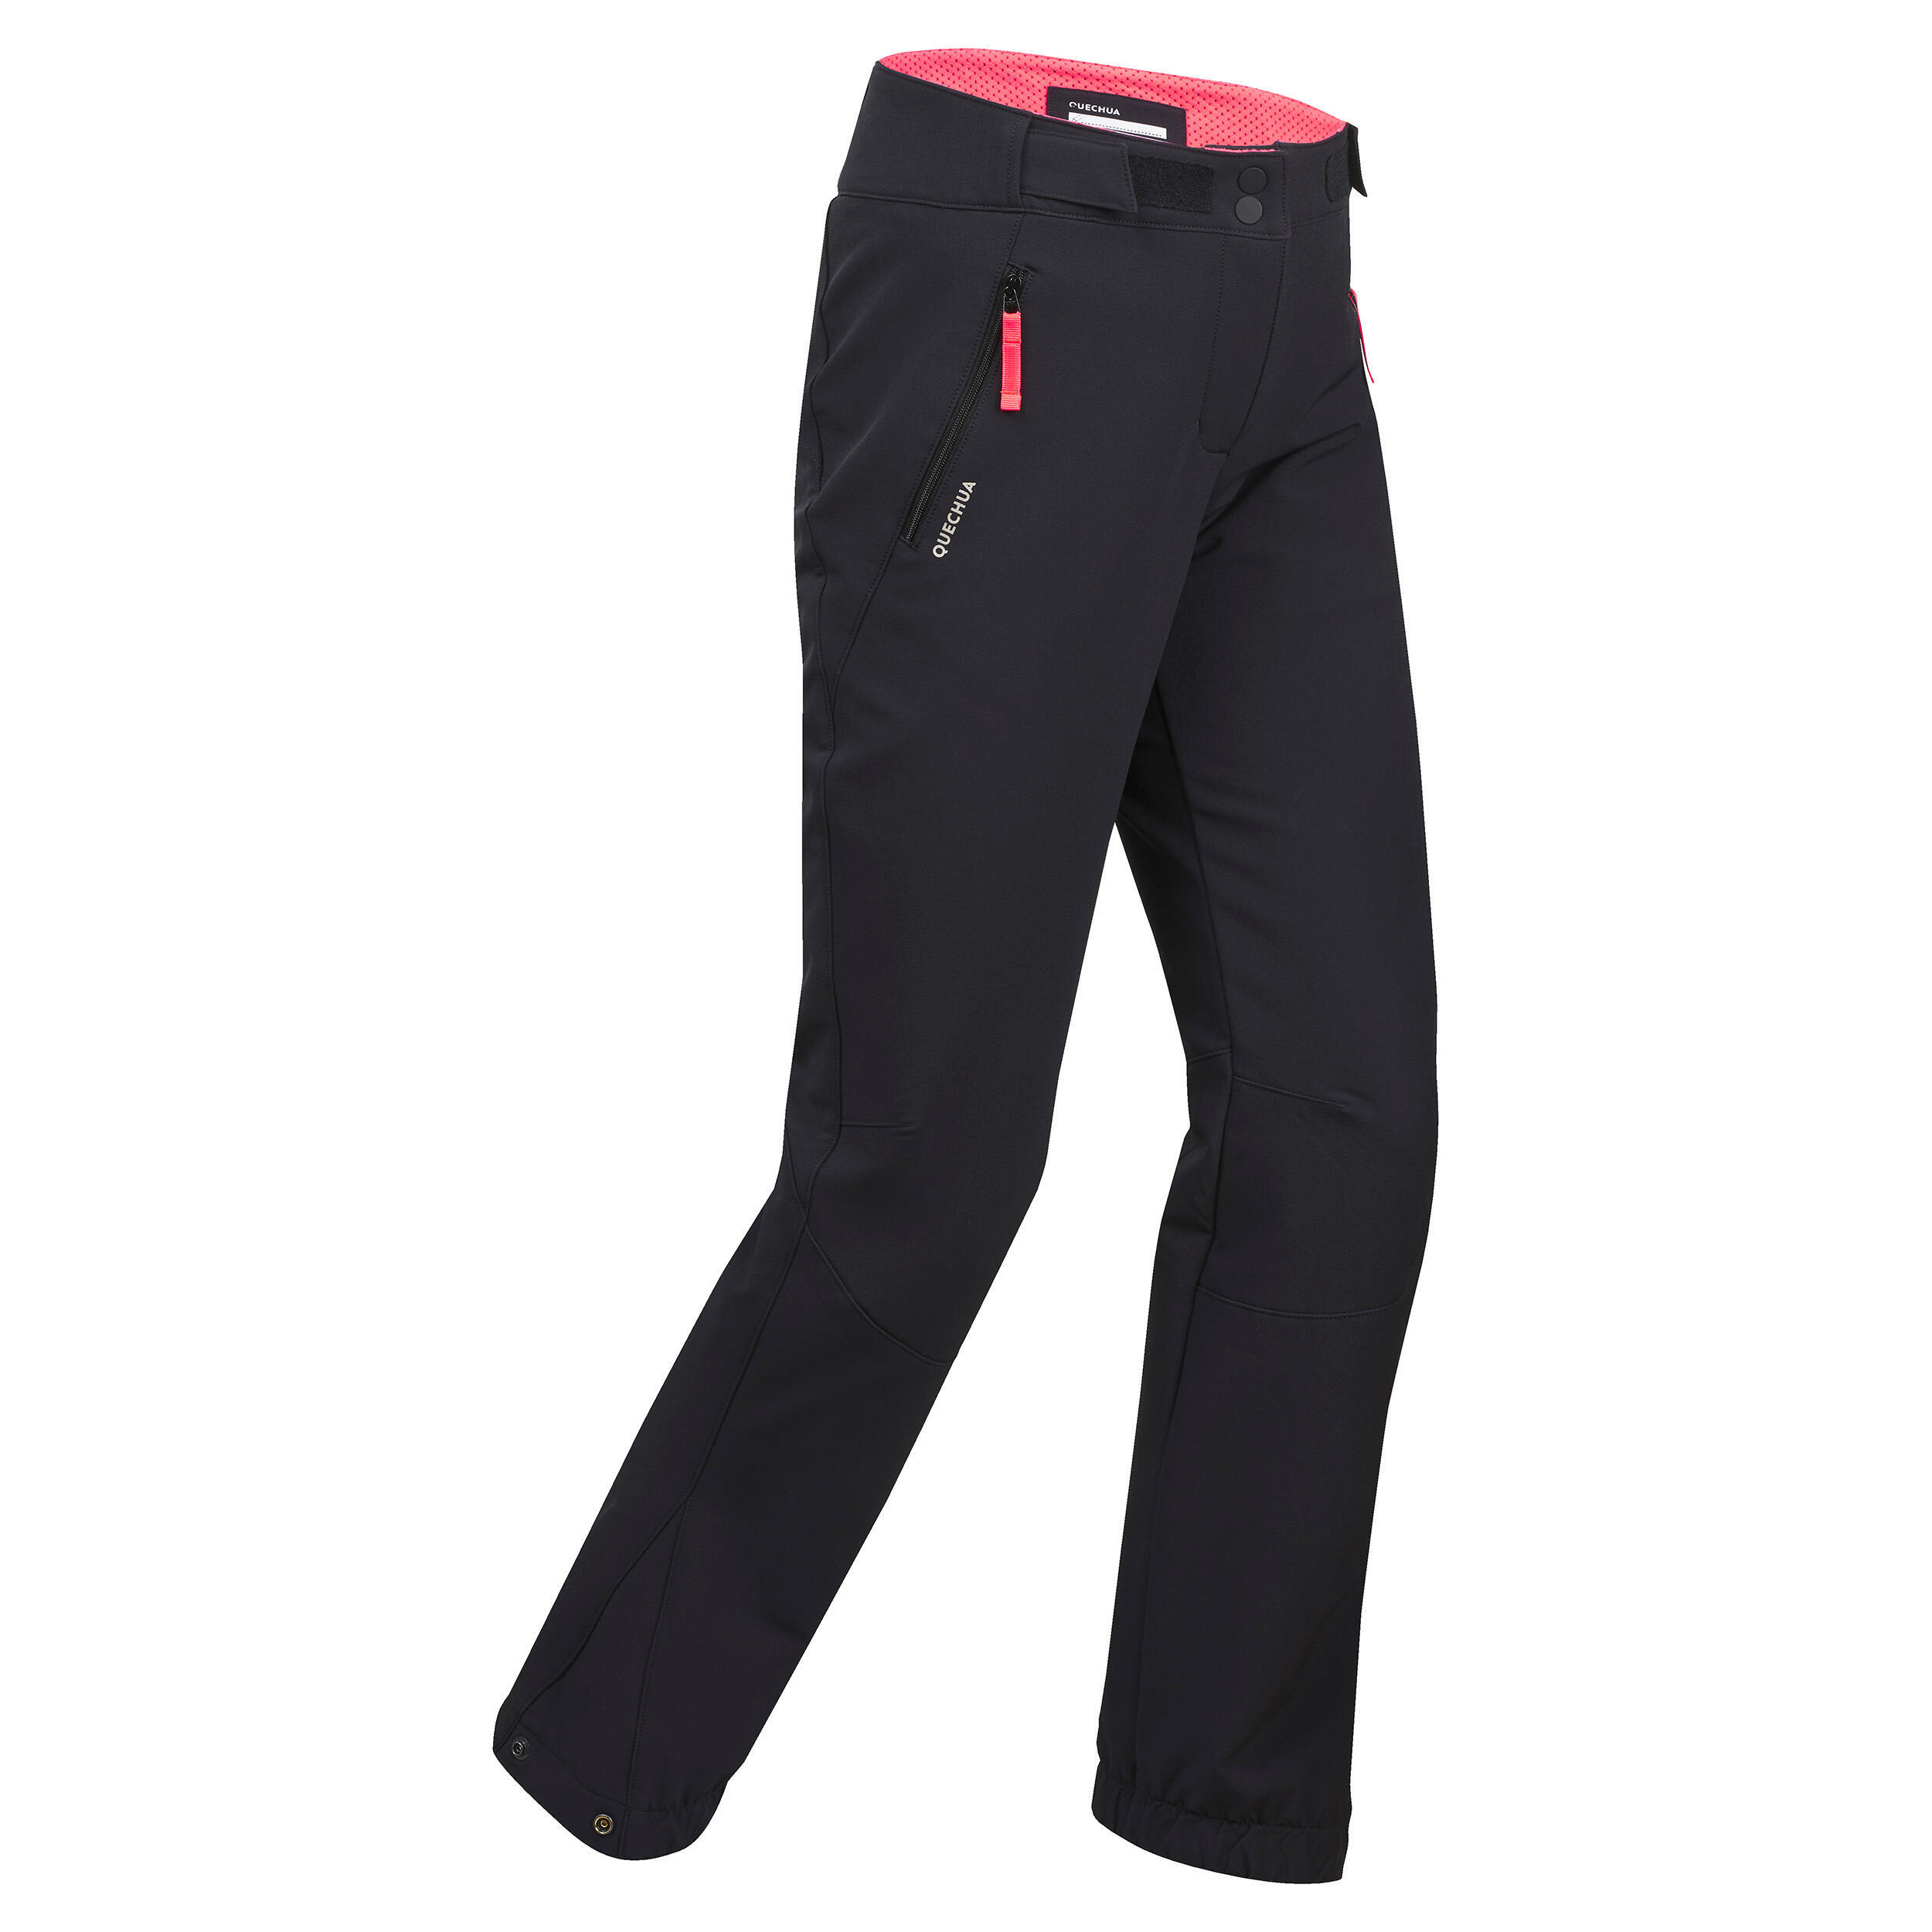 Kids’ Warm Hiking Softshell Trousers - SH500 Mountain - Ages 7-15 4/12